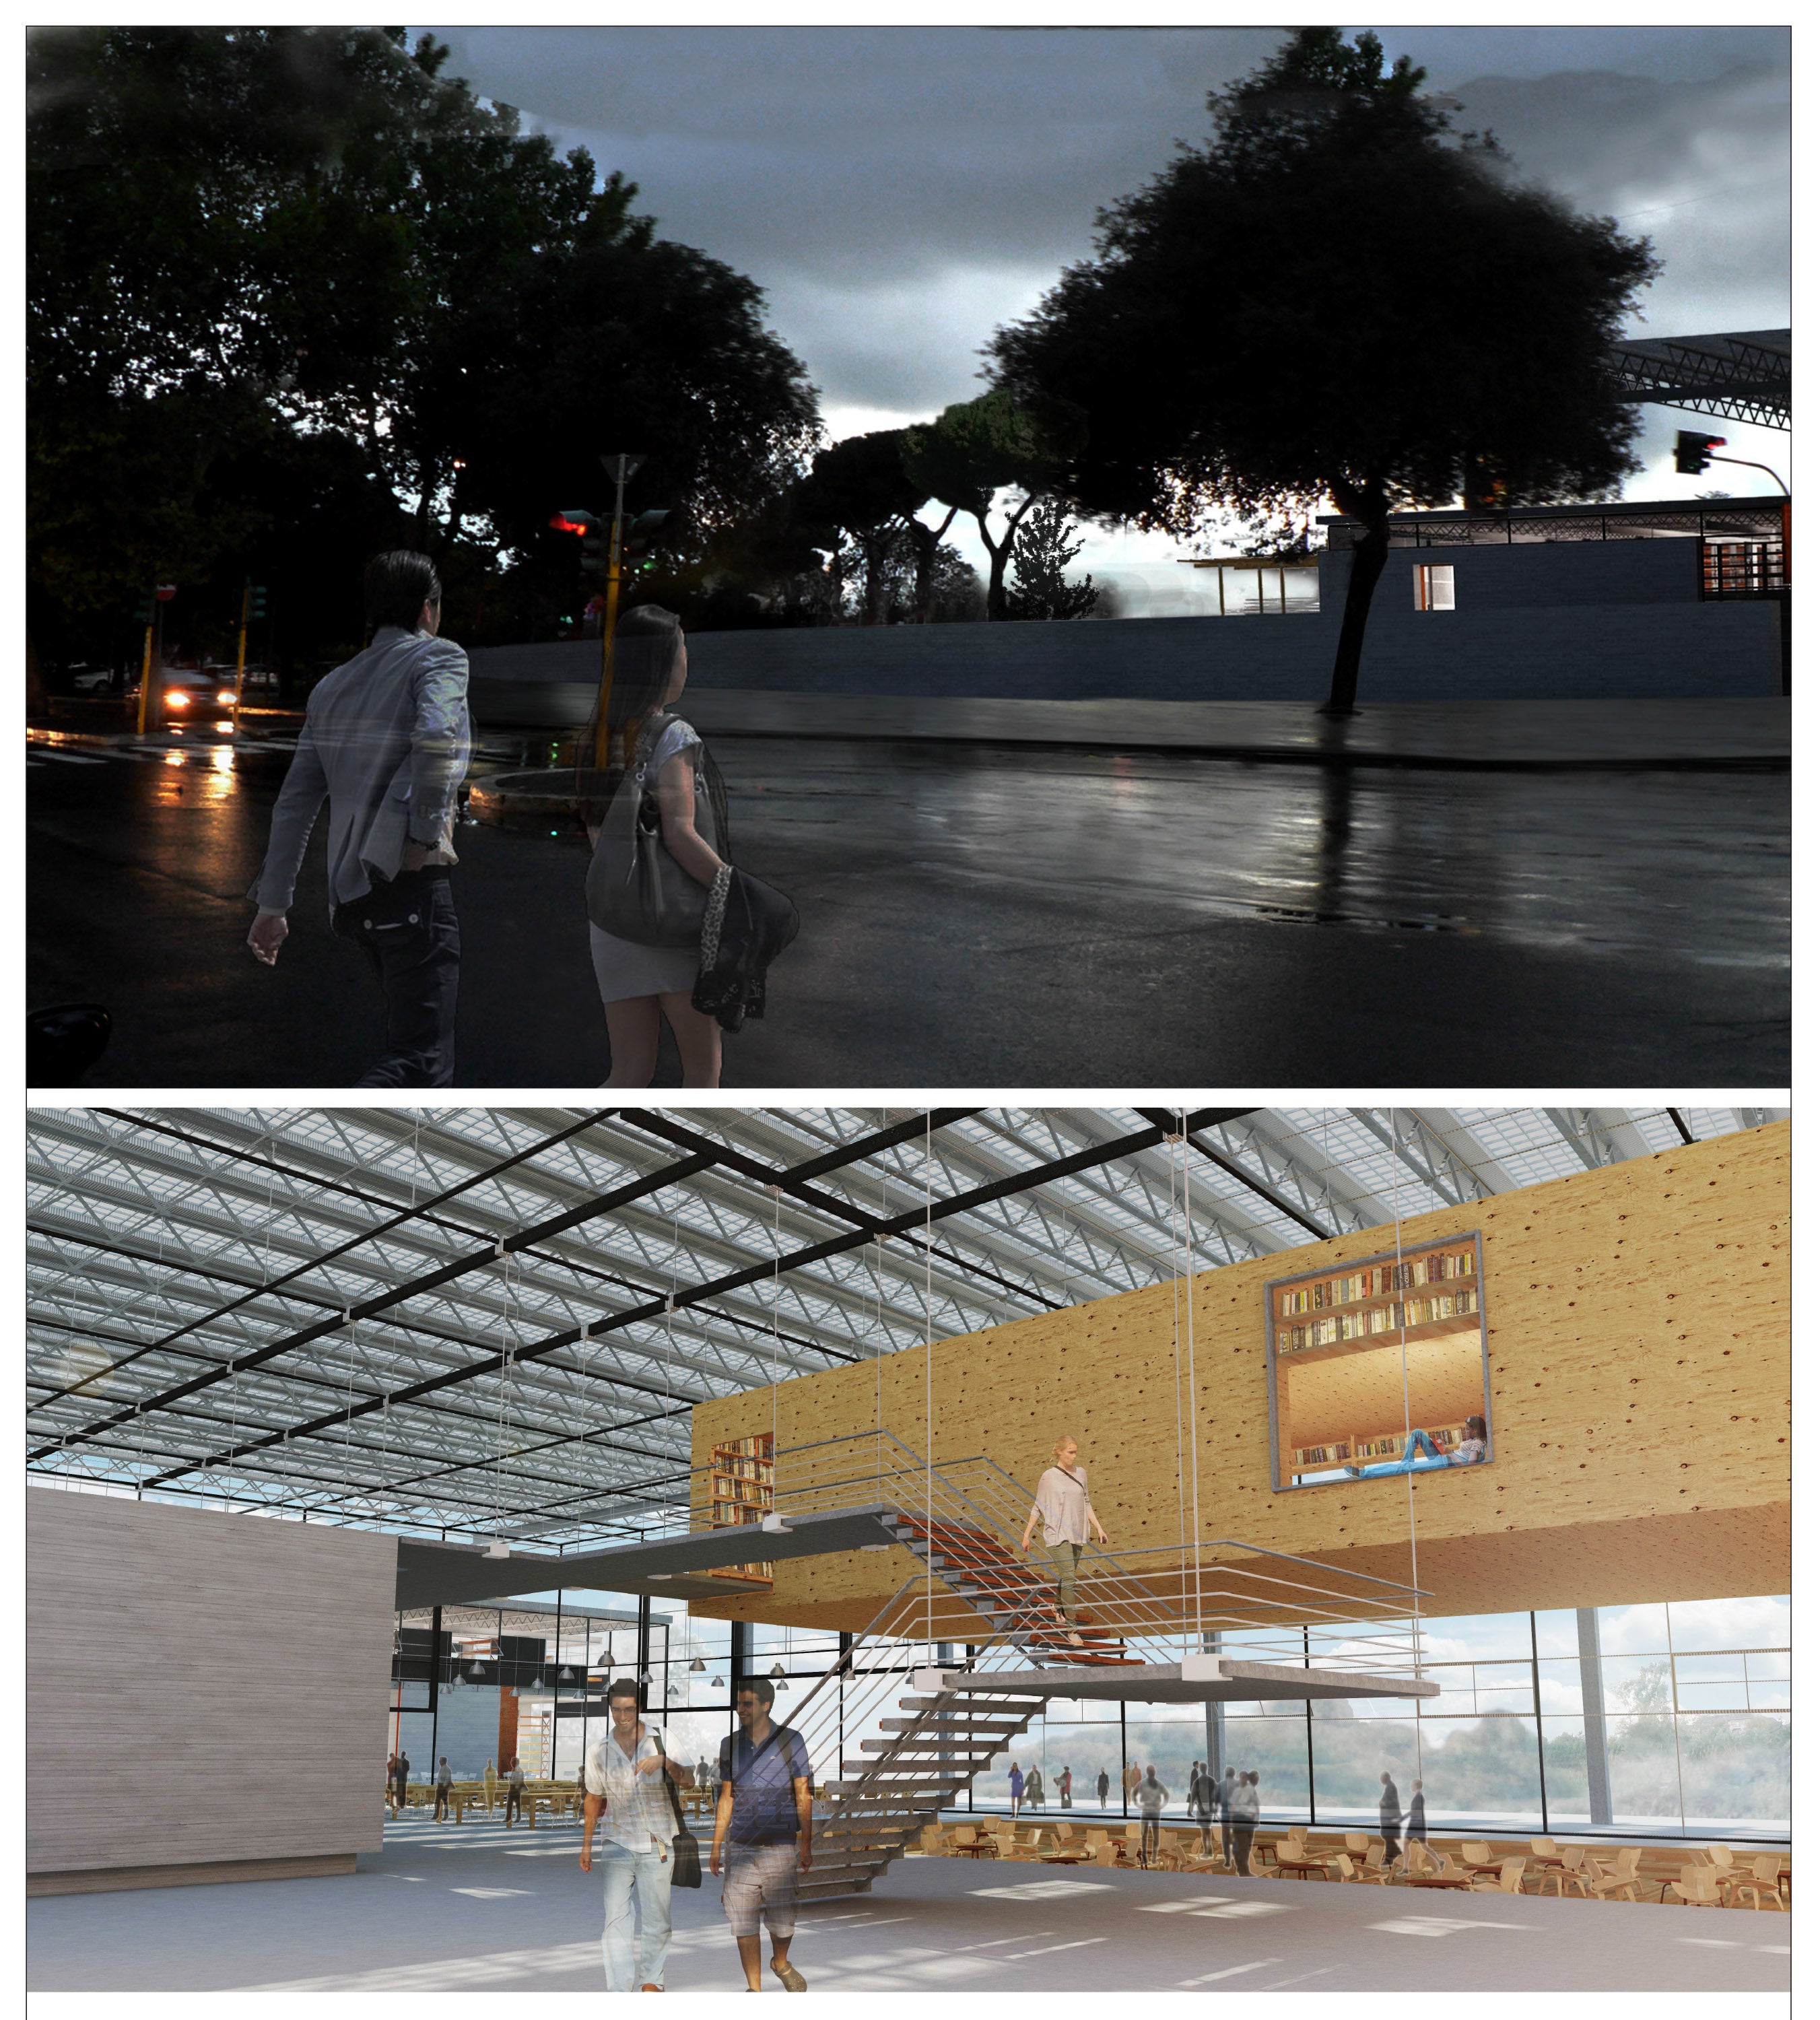 One exterior and one interior render of the building design. The structure is reminiscent to a warehouse.